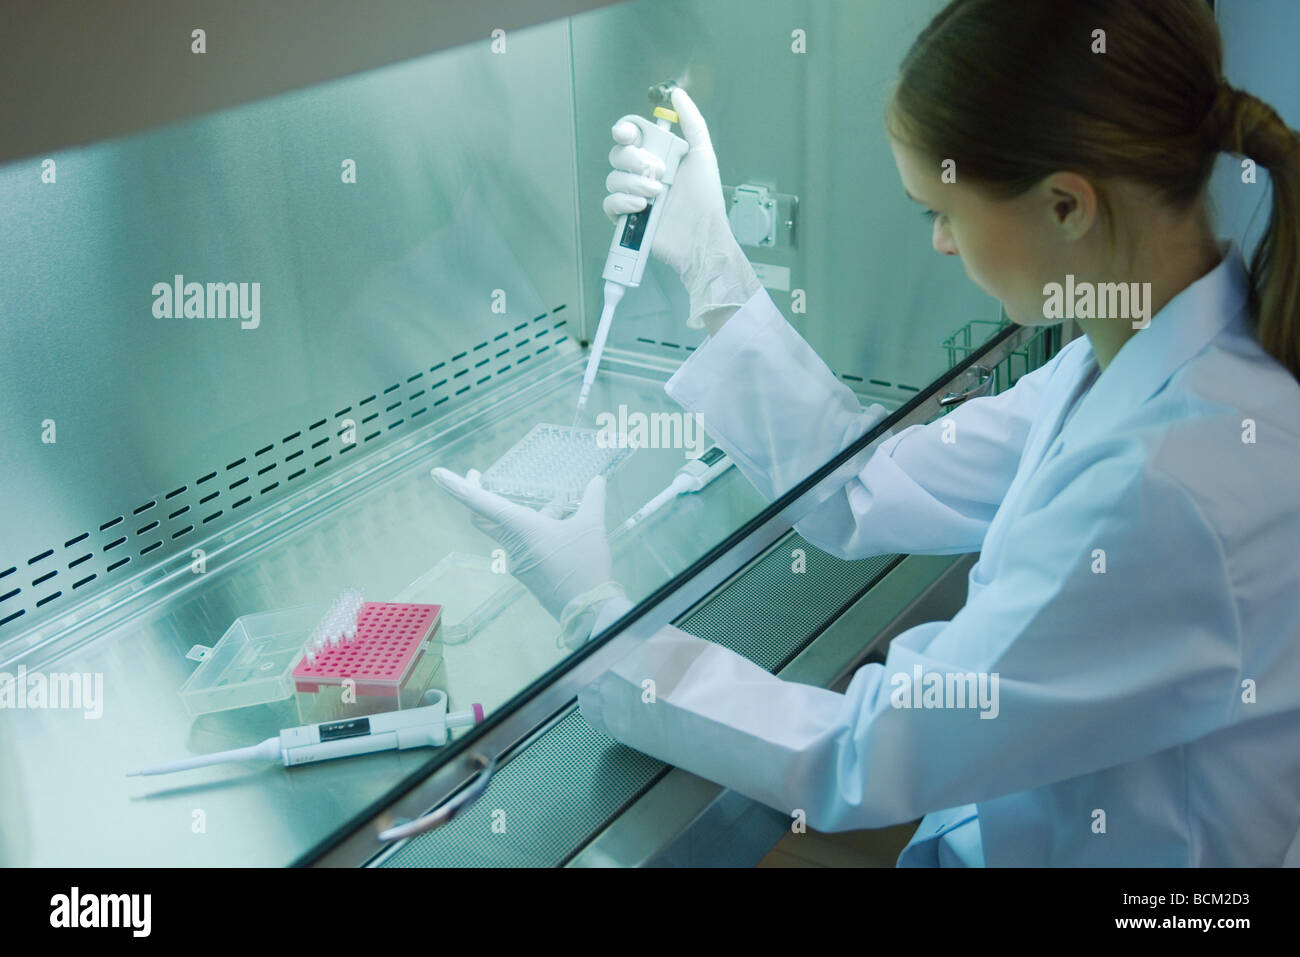 Female scientist working in laboratory, side view Banque D'Images